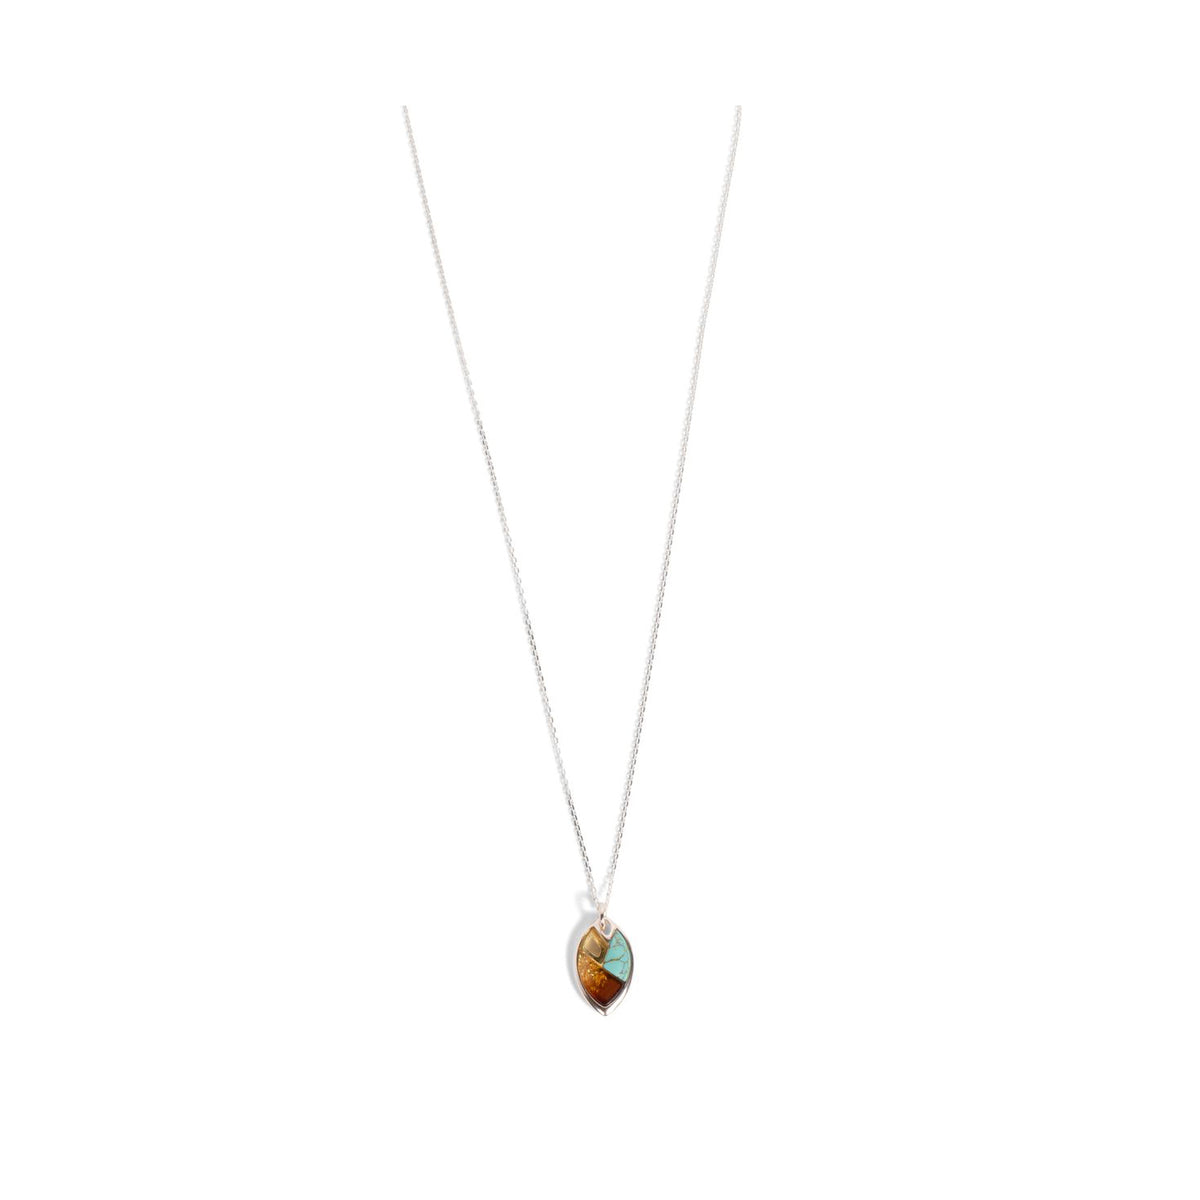 Sterling Silver Turquoise and Amber Pendant Necklace